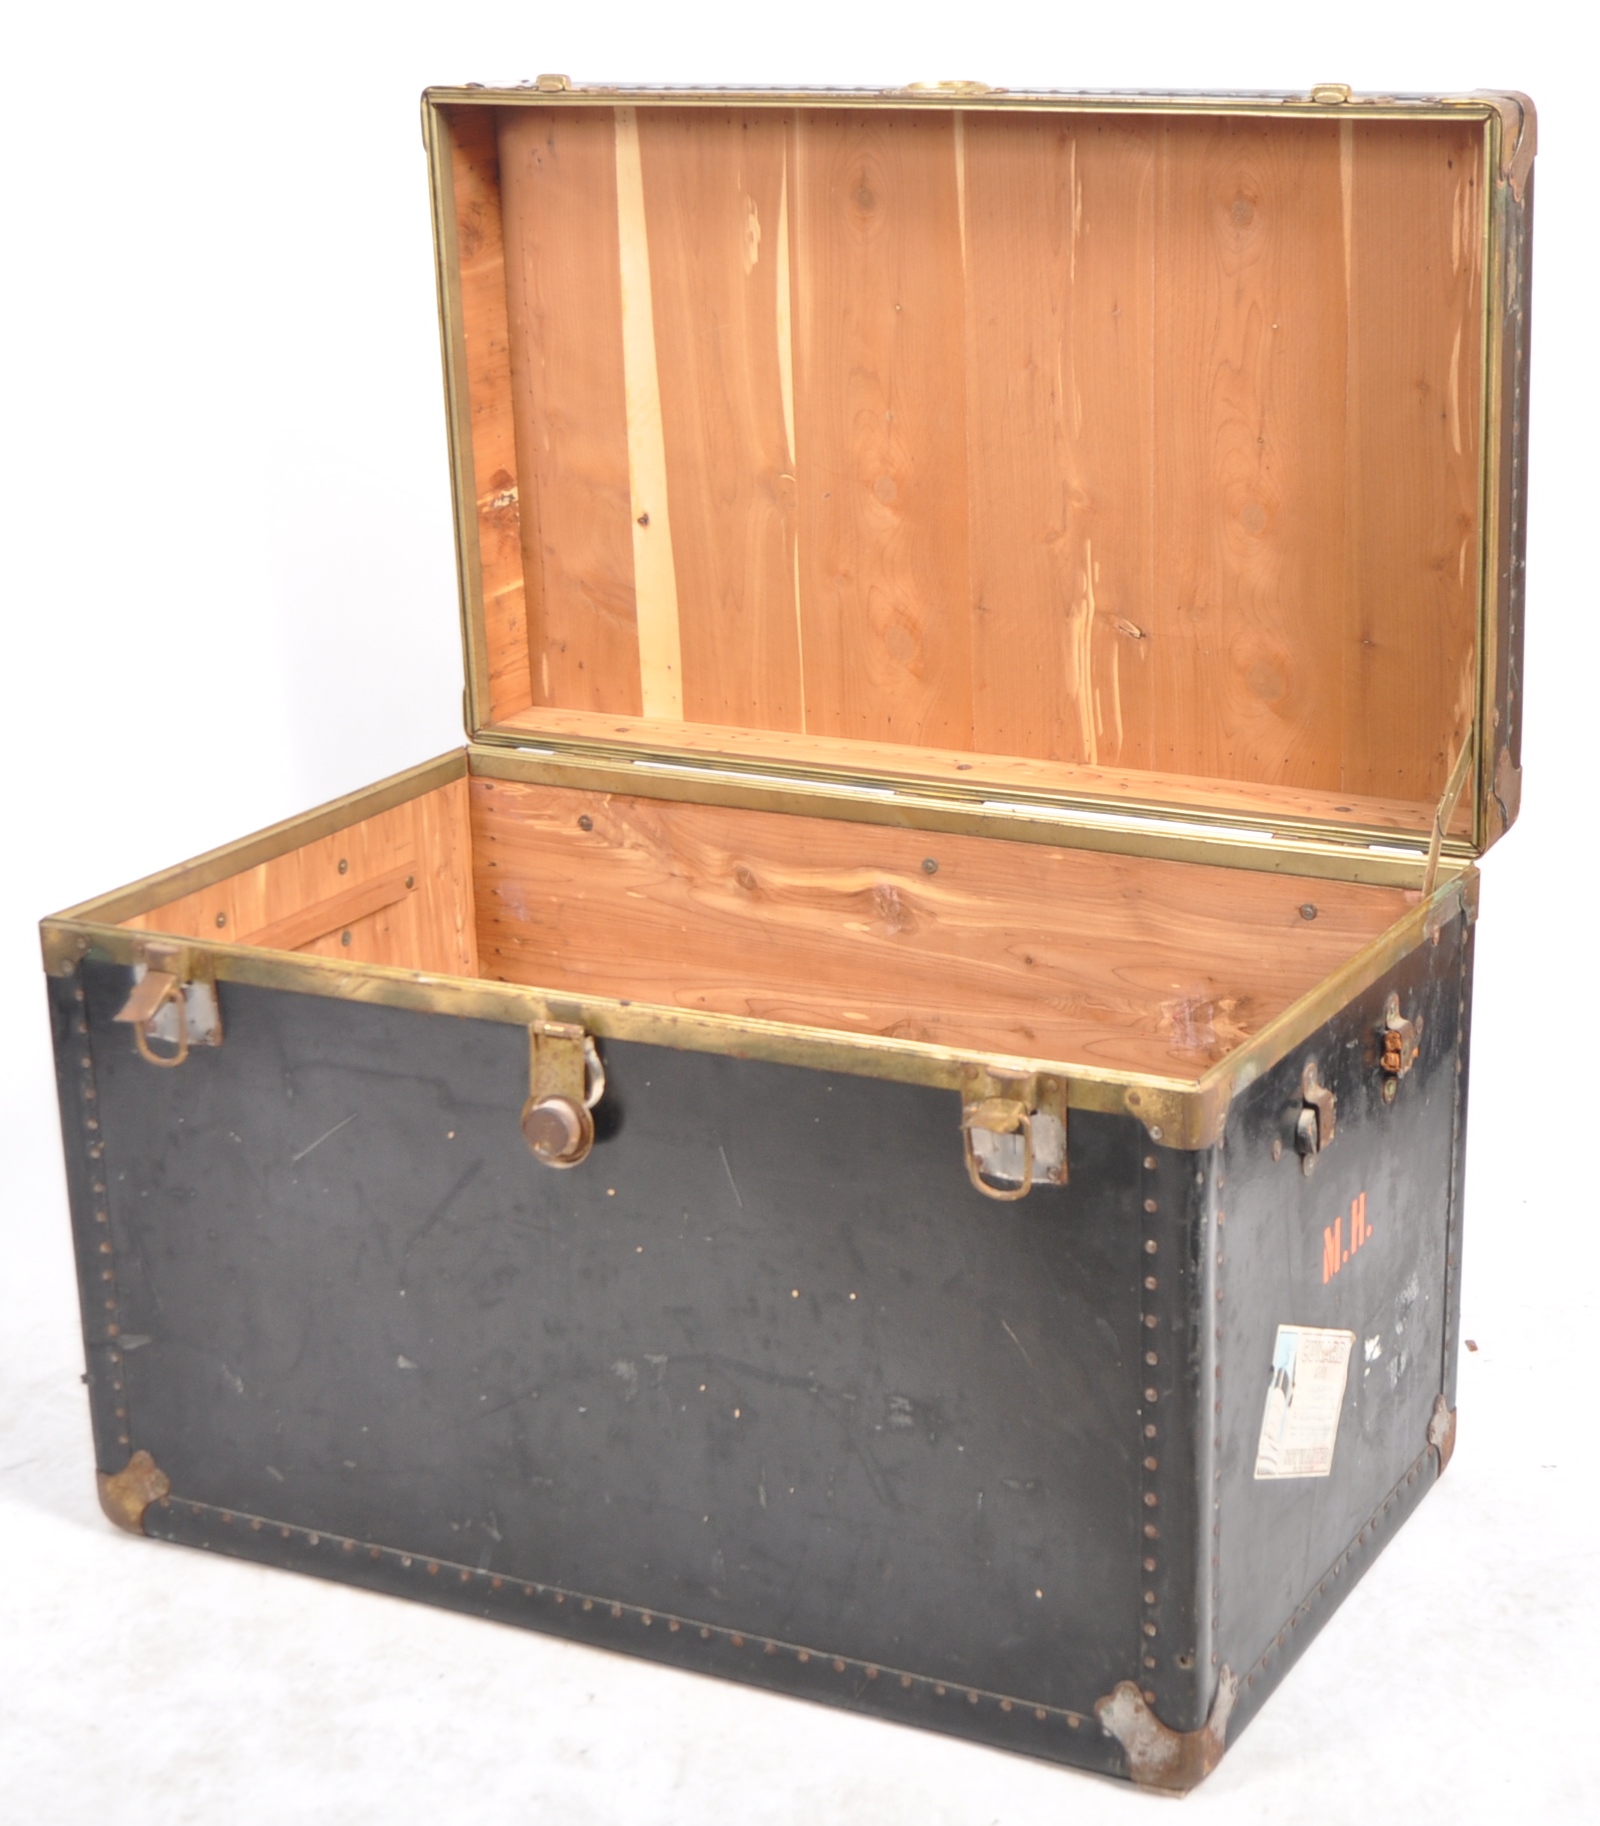 PAIR OF 1920s METAL BOUND STEAMER TRUNK CHEST SIDE TABLES - Image 8 of 12